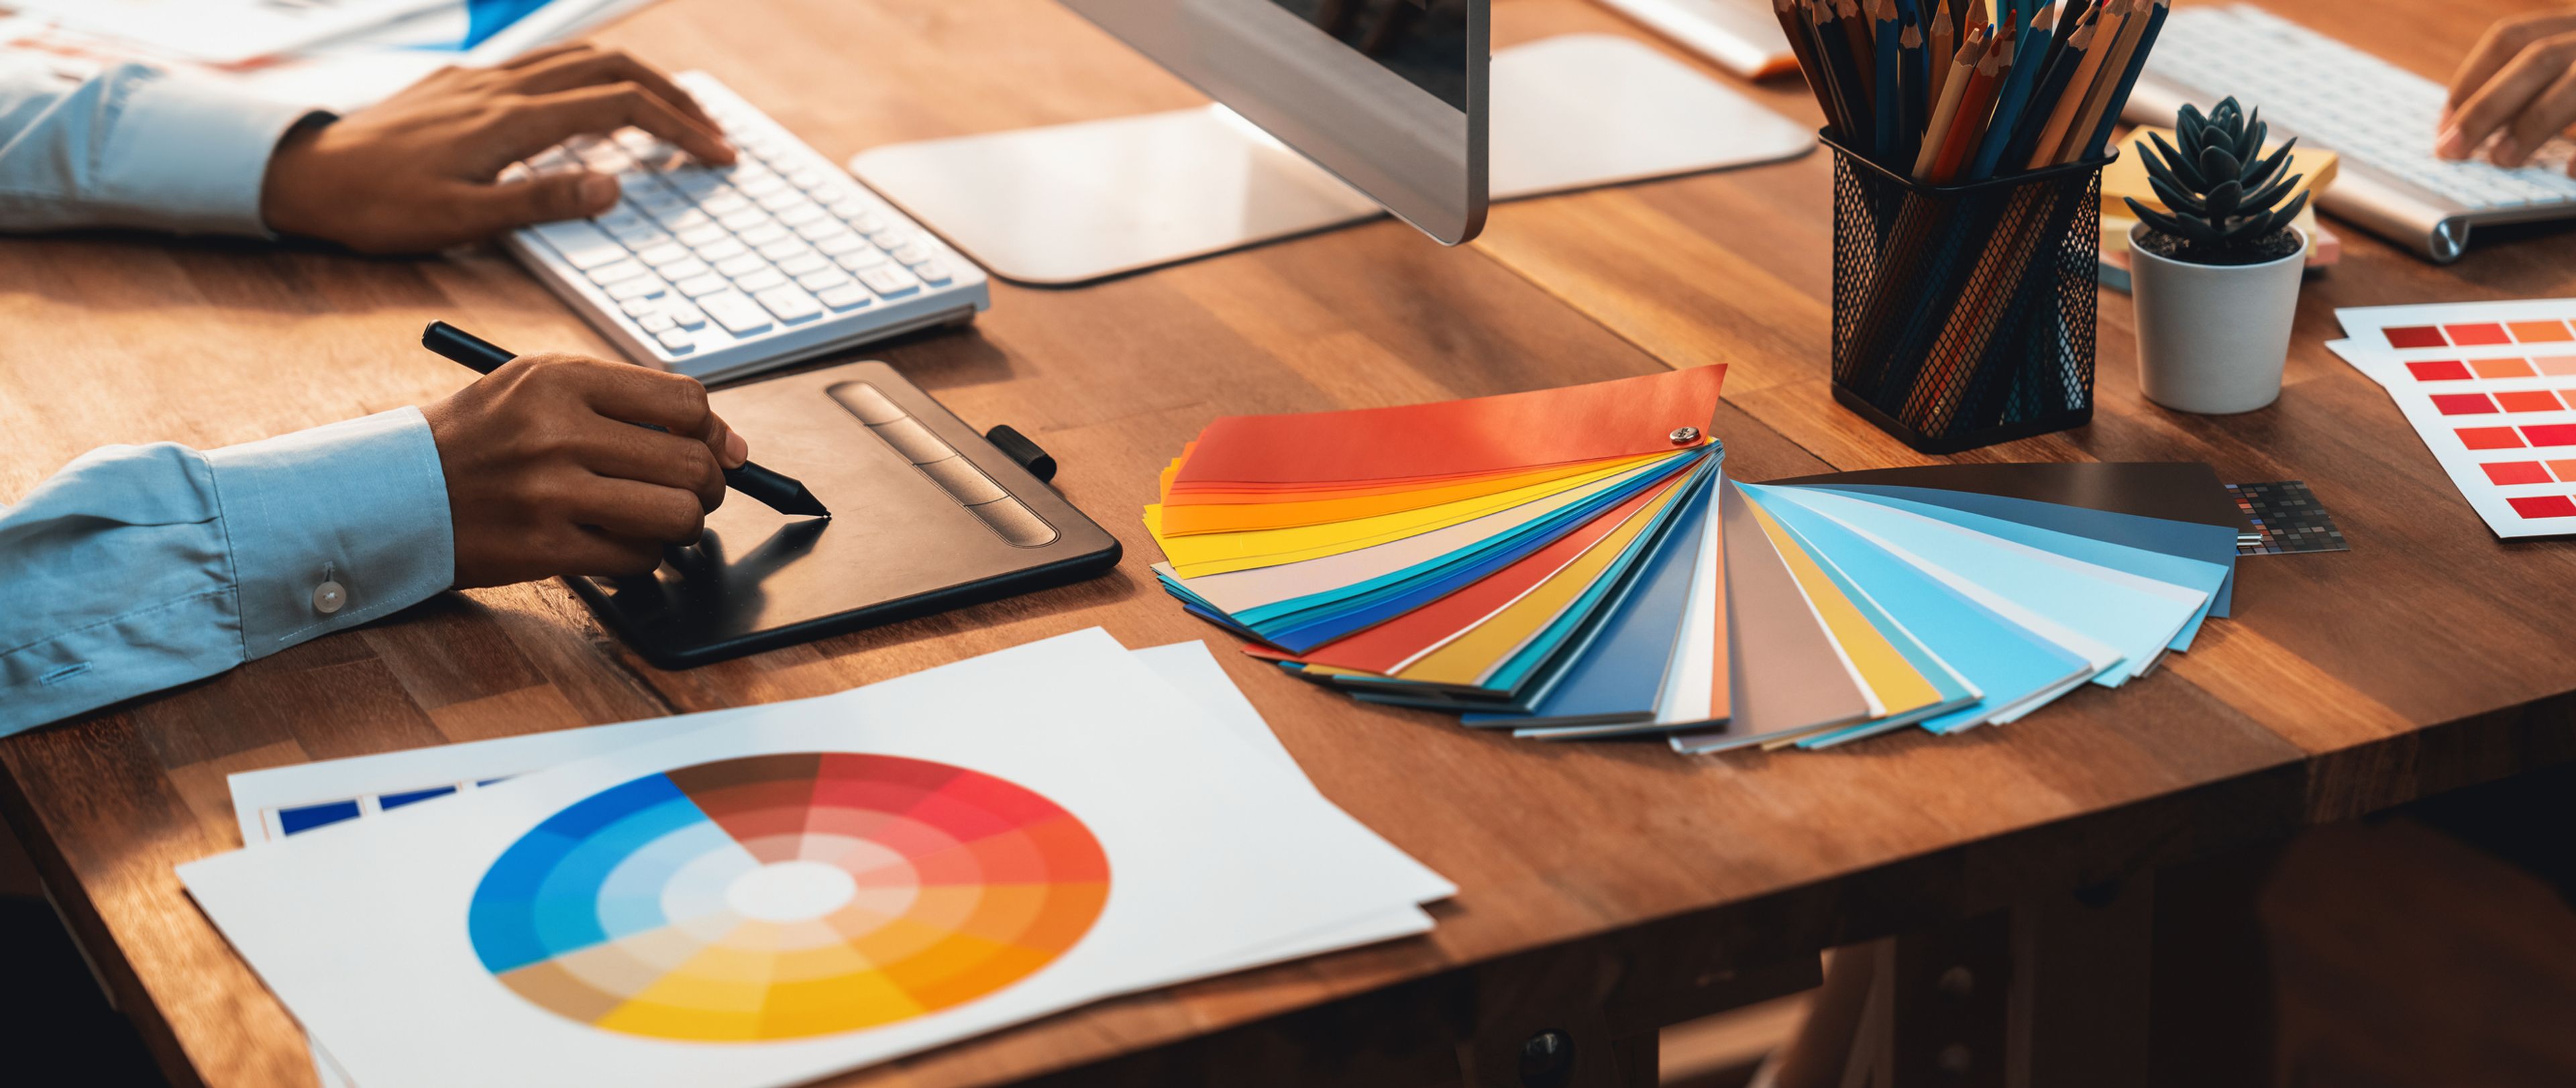 Branding by Color: What Do Your Colors Say About Your Business? - Clay